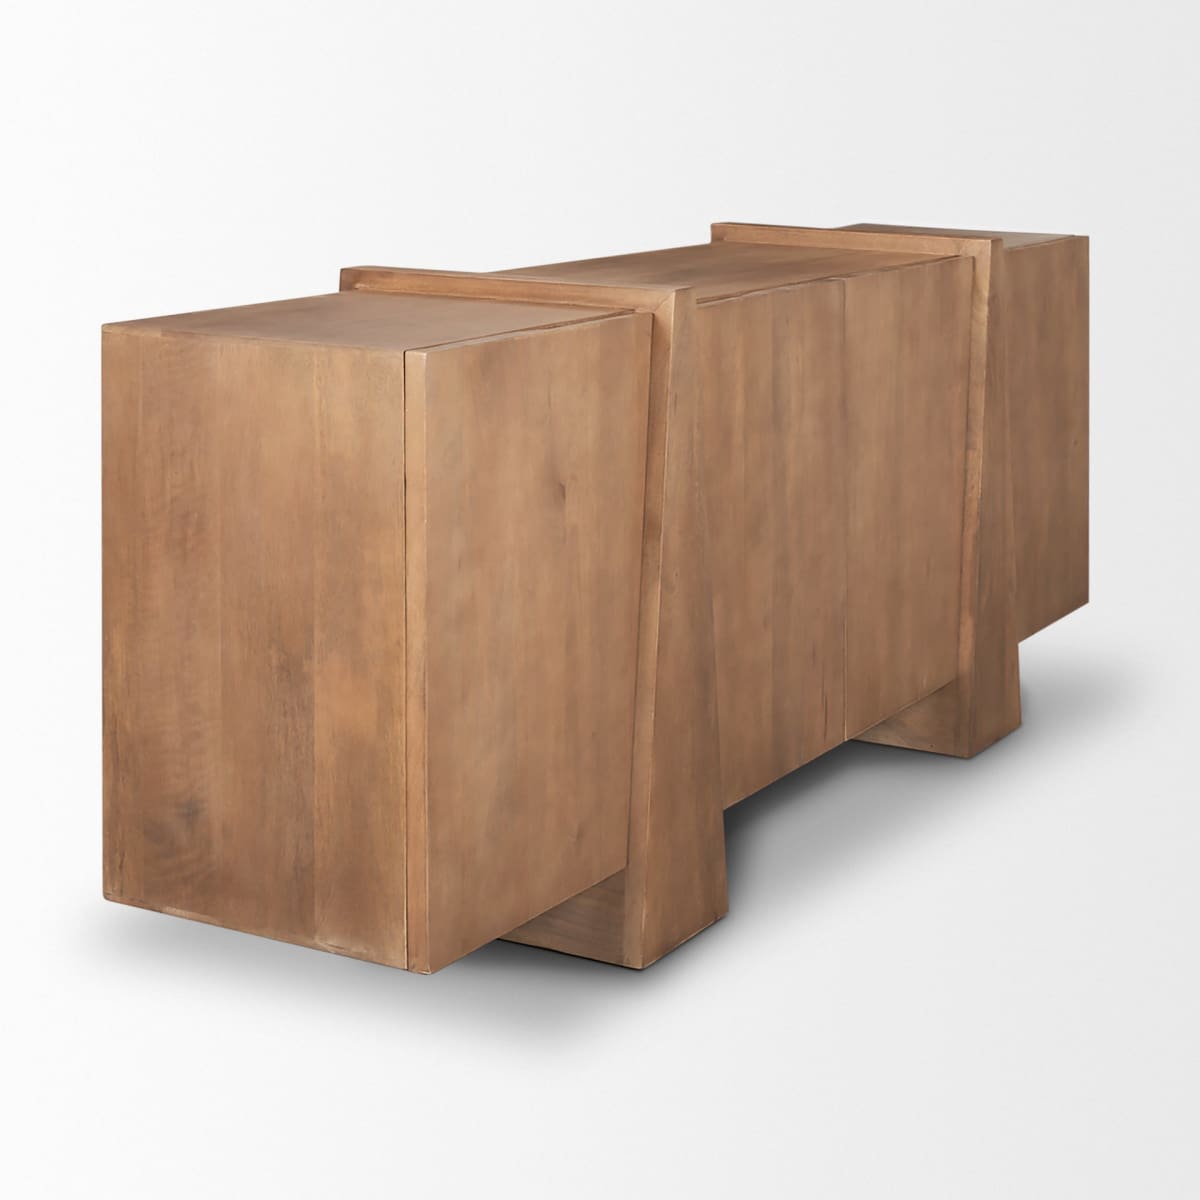 Eula Sideboard Brown Wood - sideboards-and-buffets